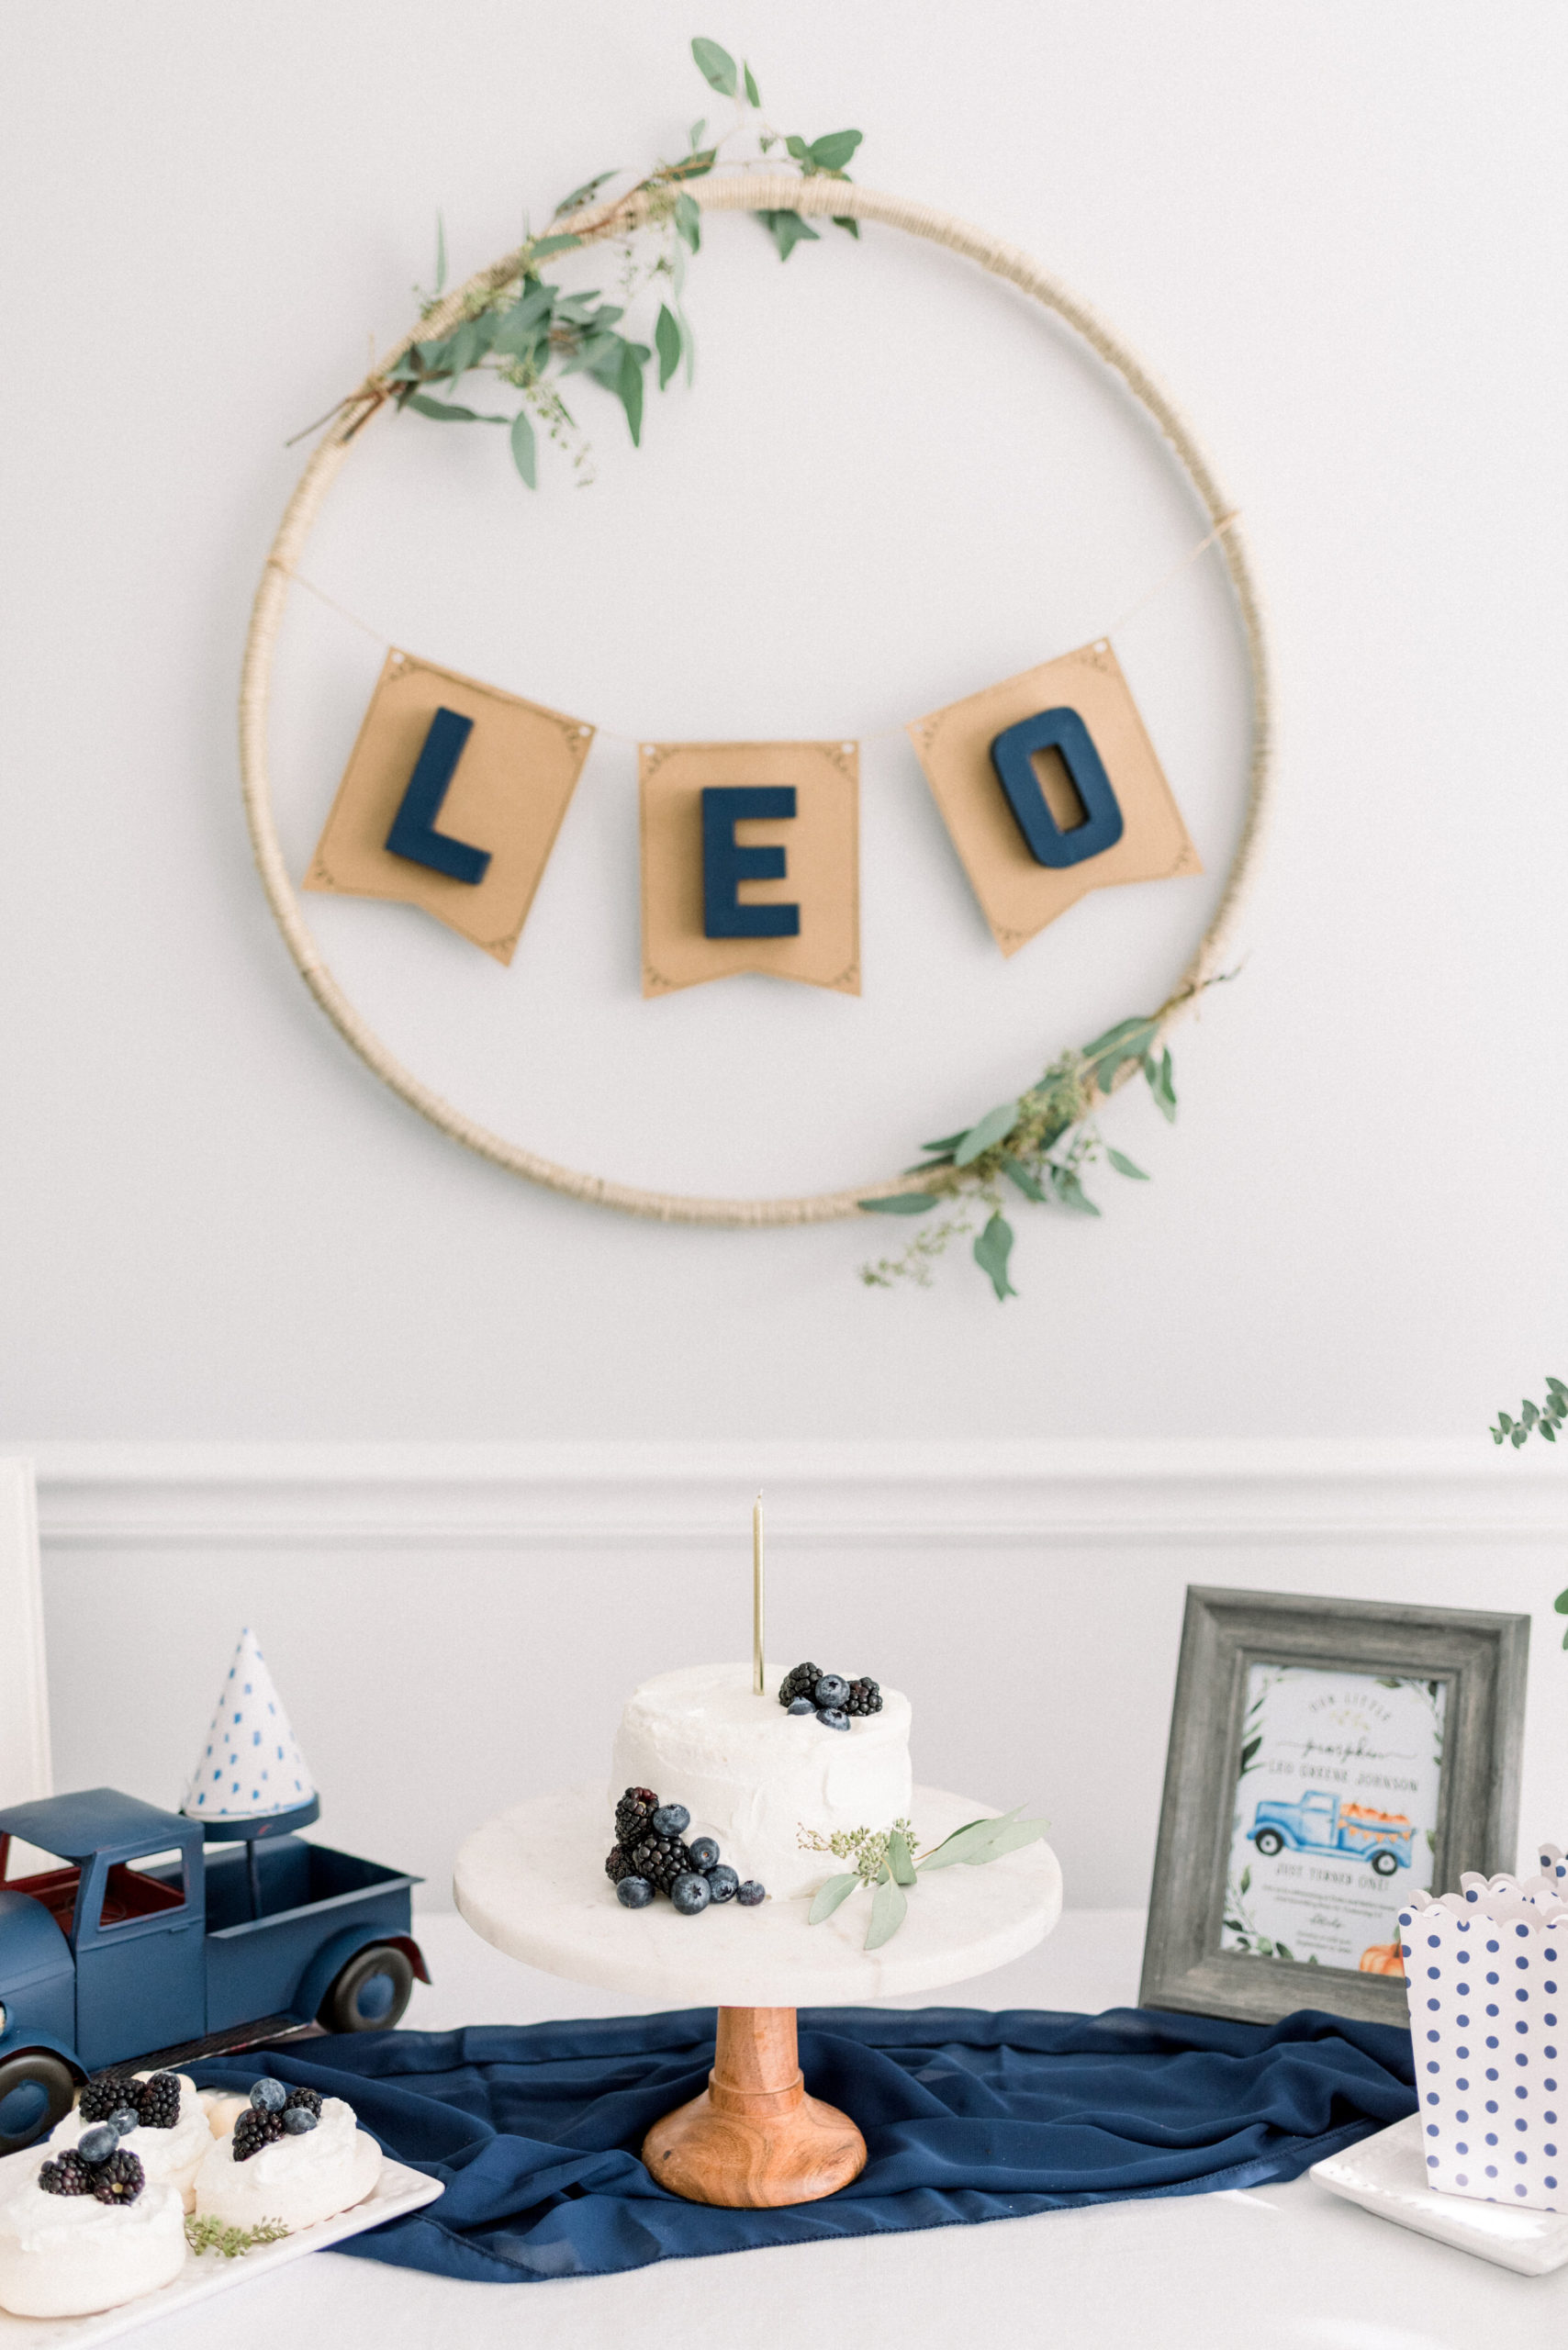 This LEO banner was fun! We used twine/jute string and hot glue to cover a hoola hoop and tied on some fresh eucalyptus. For the banner, we used this natural DIY banner from Party City and painted some cardboard letters from Hobby Lobby and stuck them on! I love how it turned out.